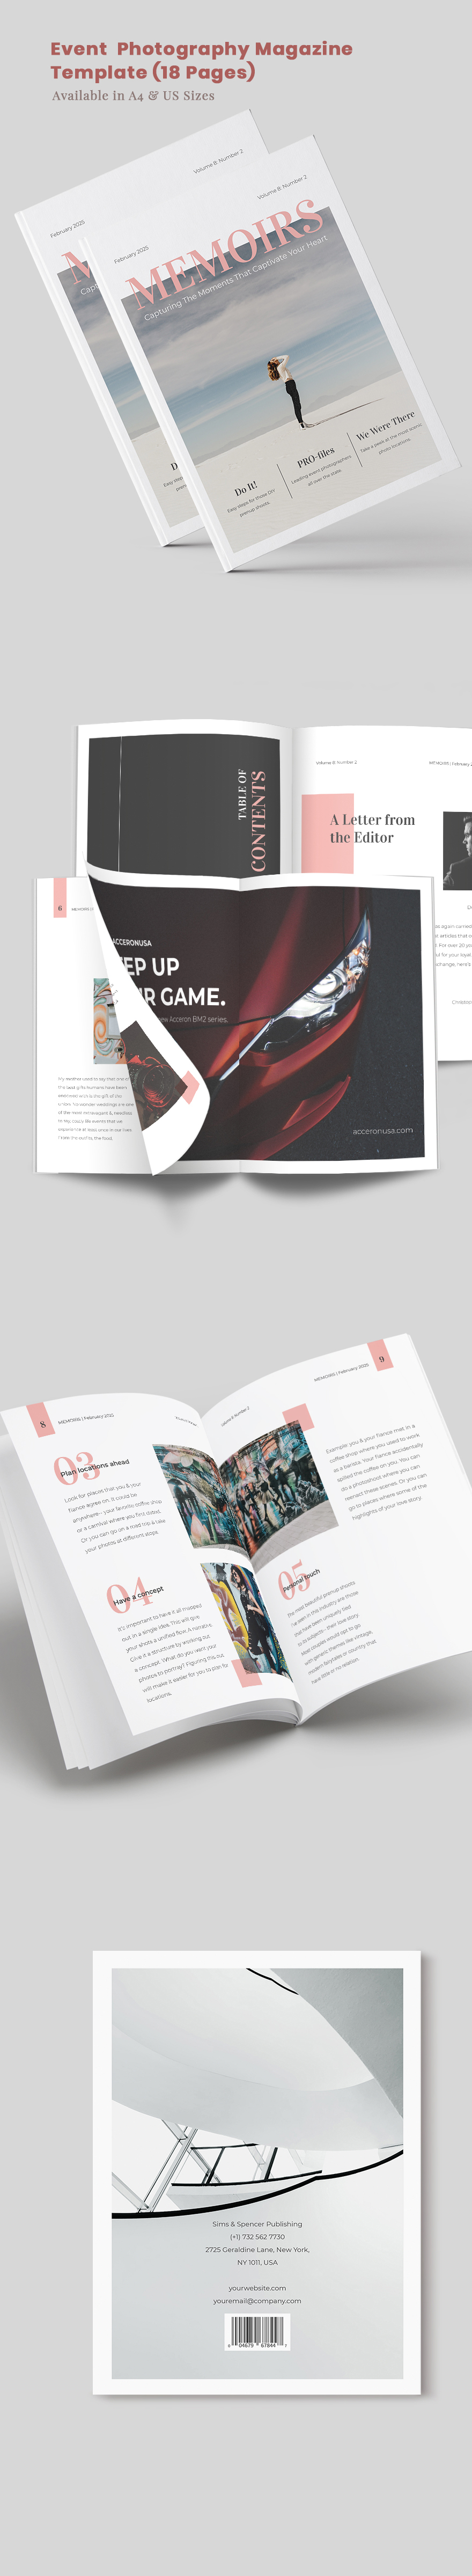 Event Photography Magazine Template